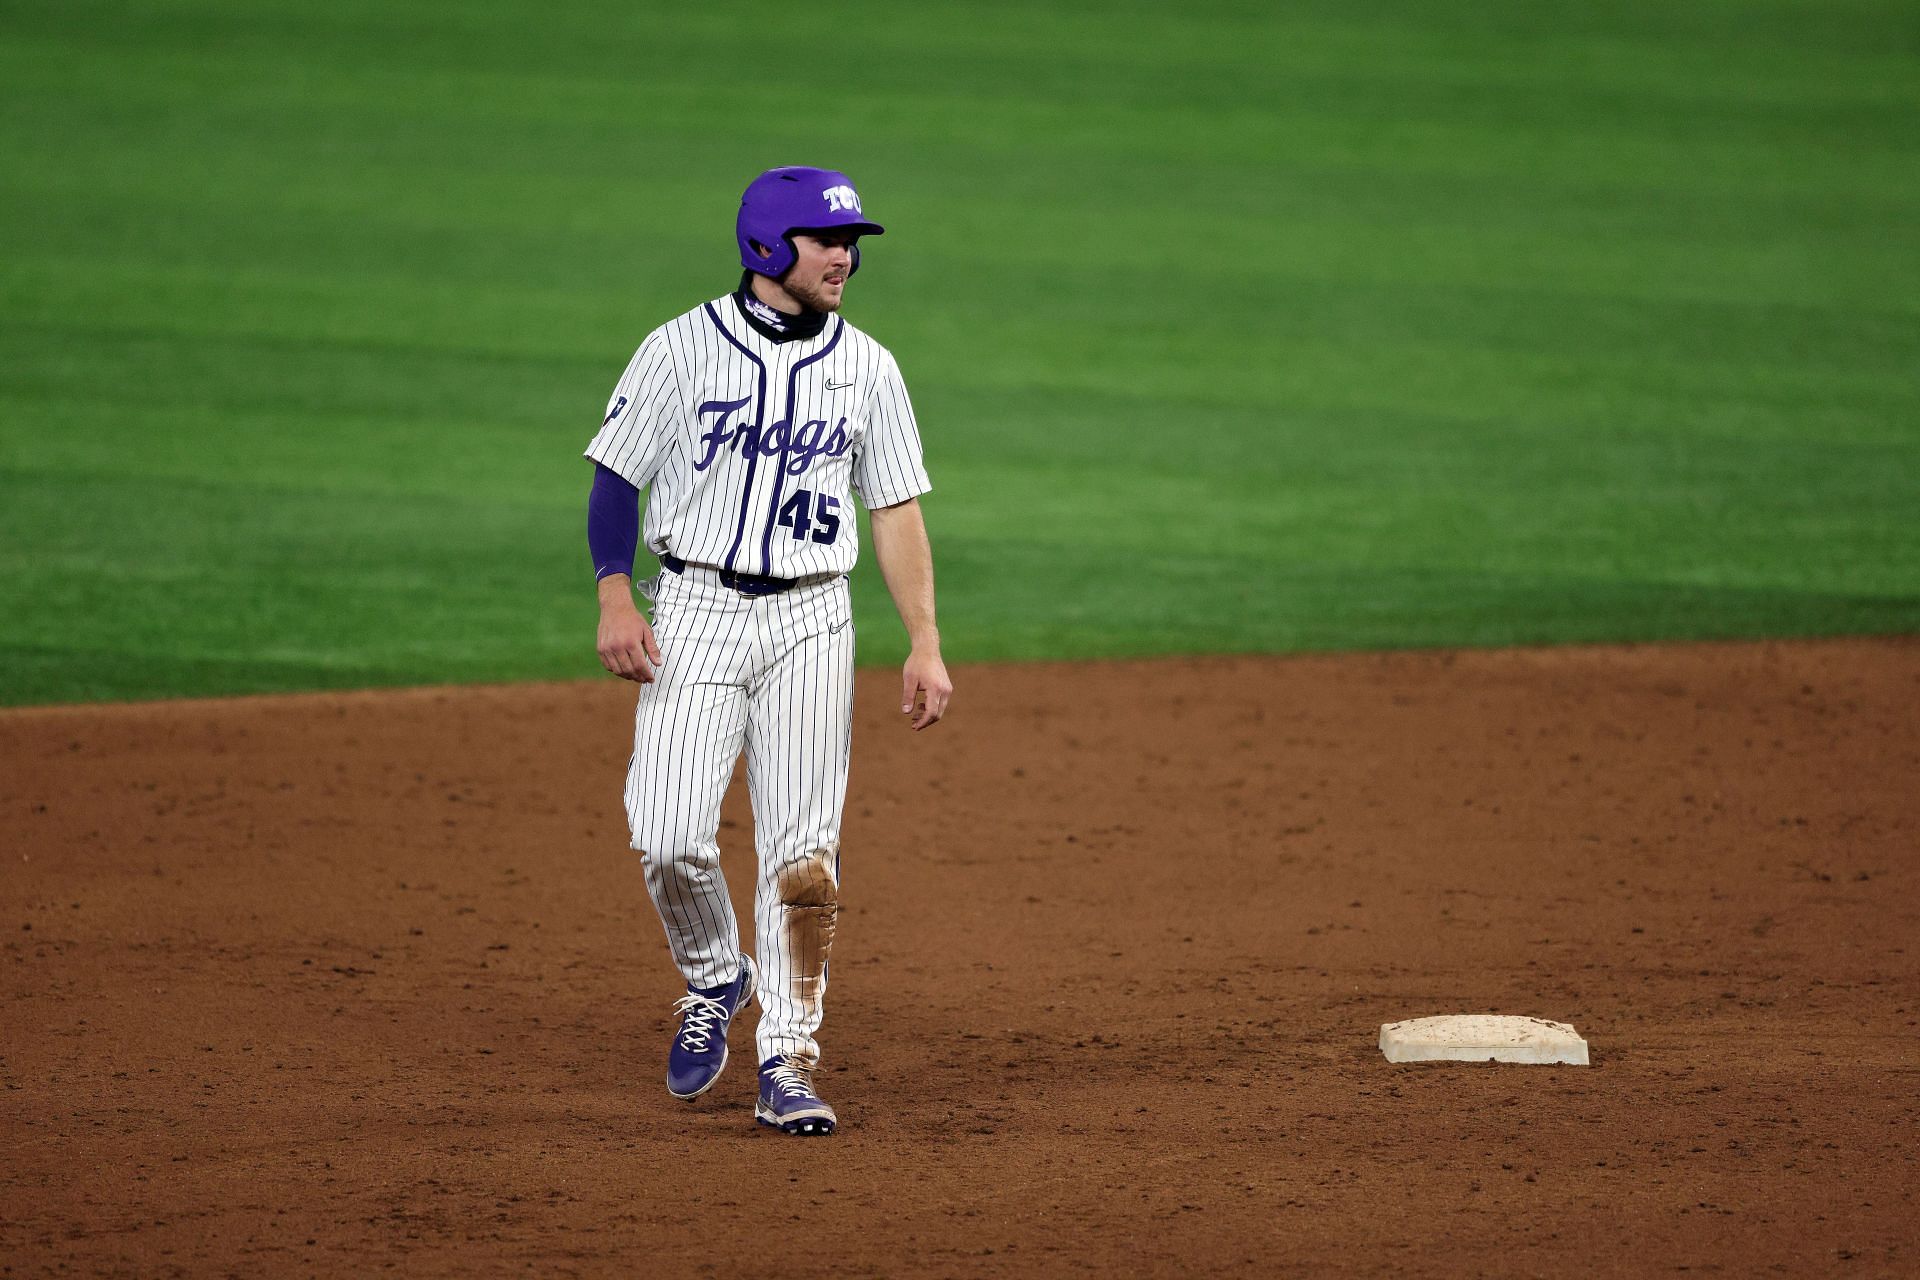 TCU in sixth College World Series after winning 11 straight